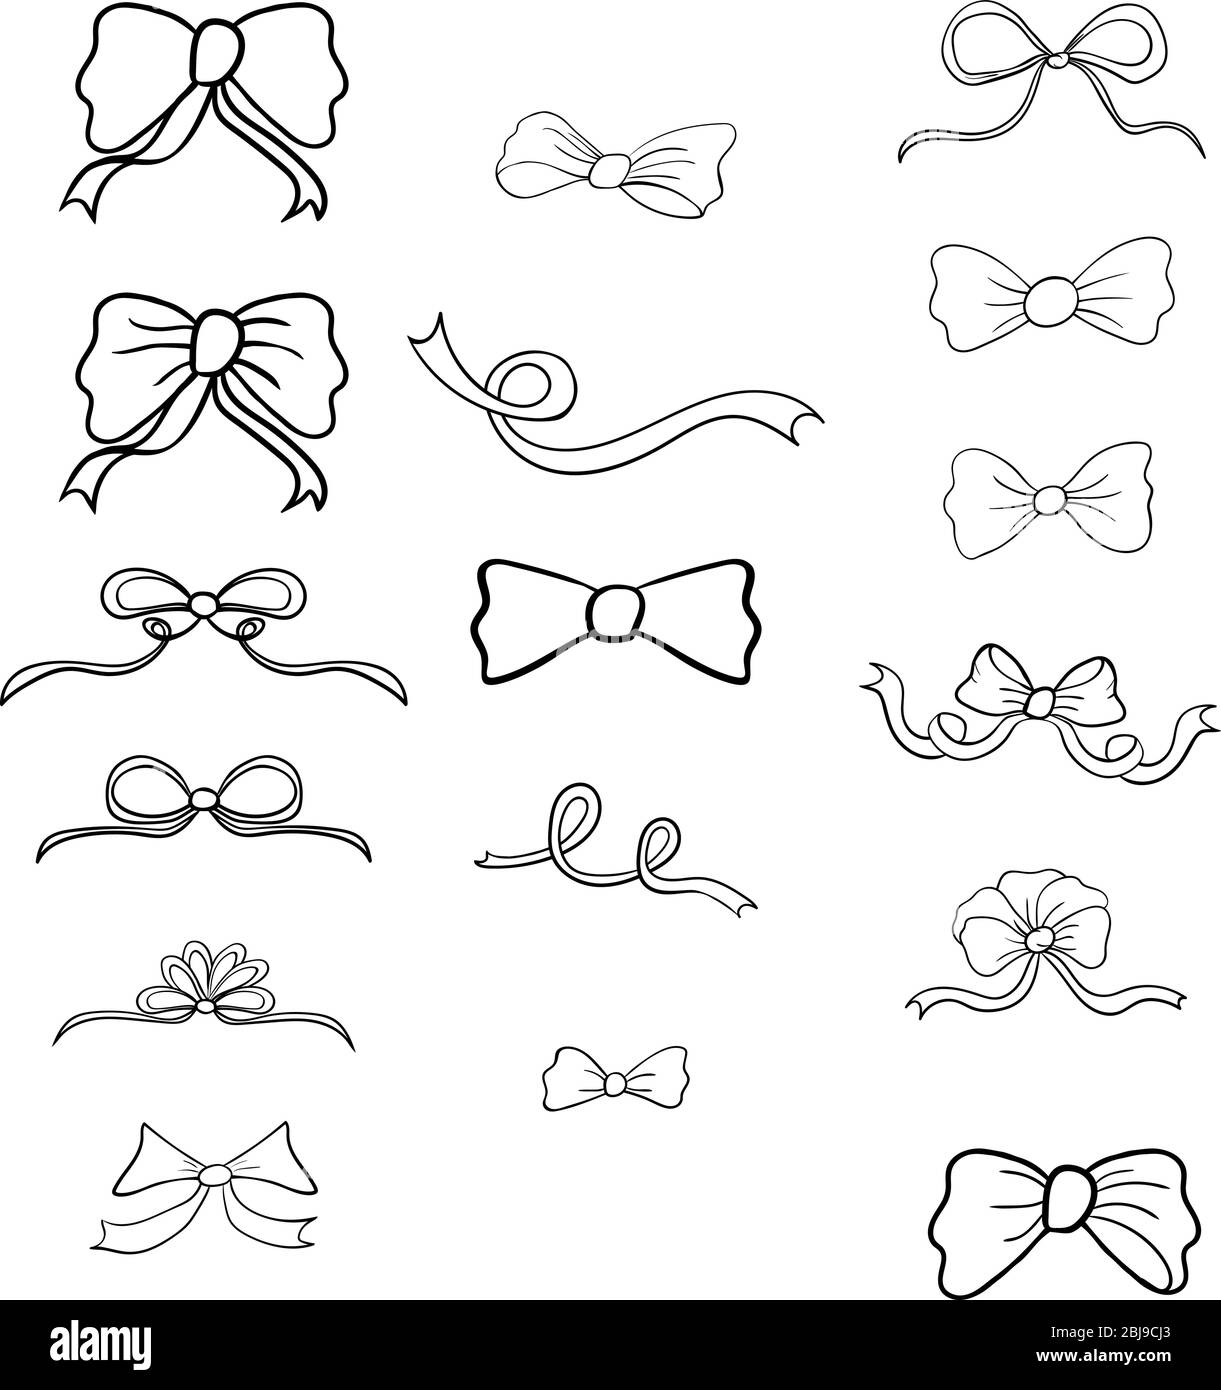 Set hand drawn outline bows isolated on white background Stock Vector ...